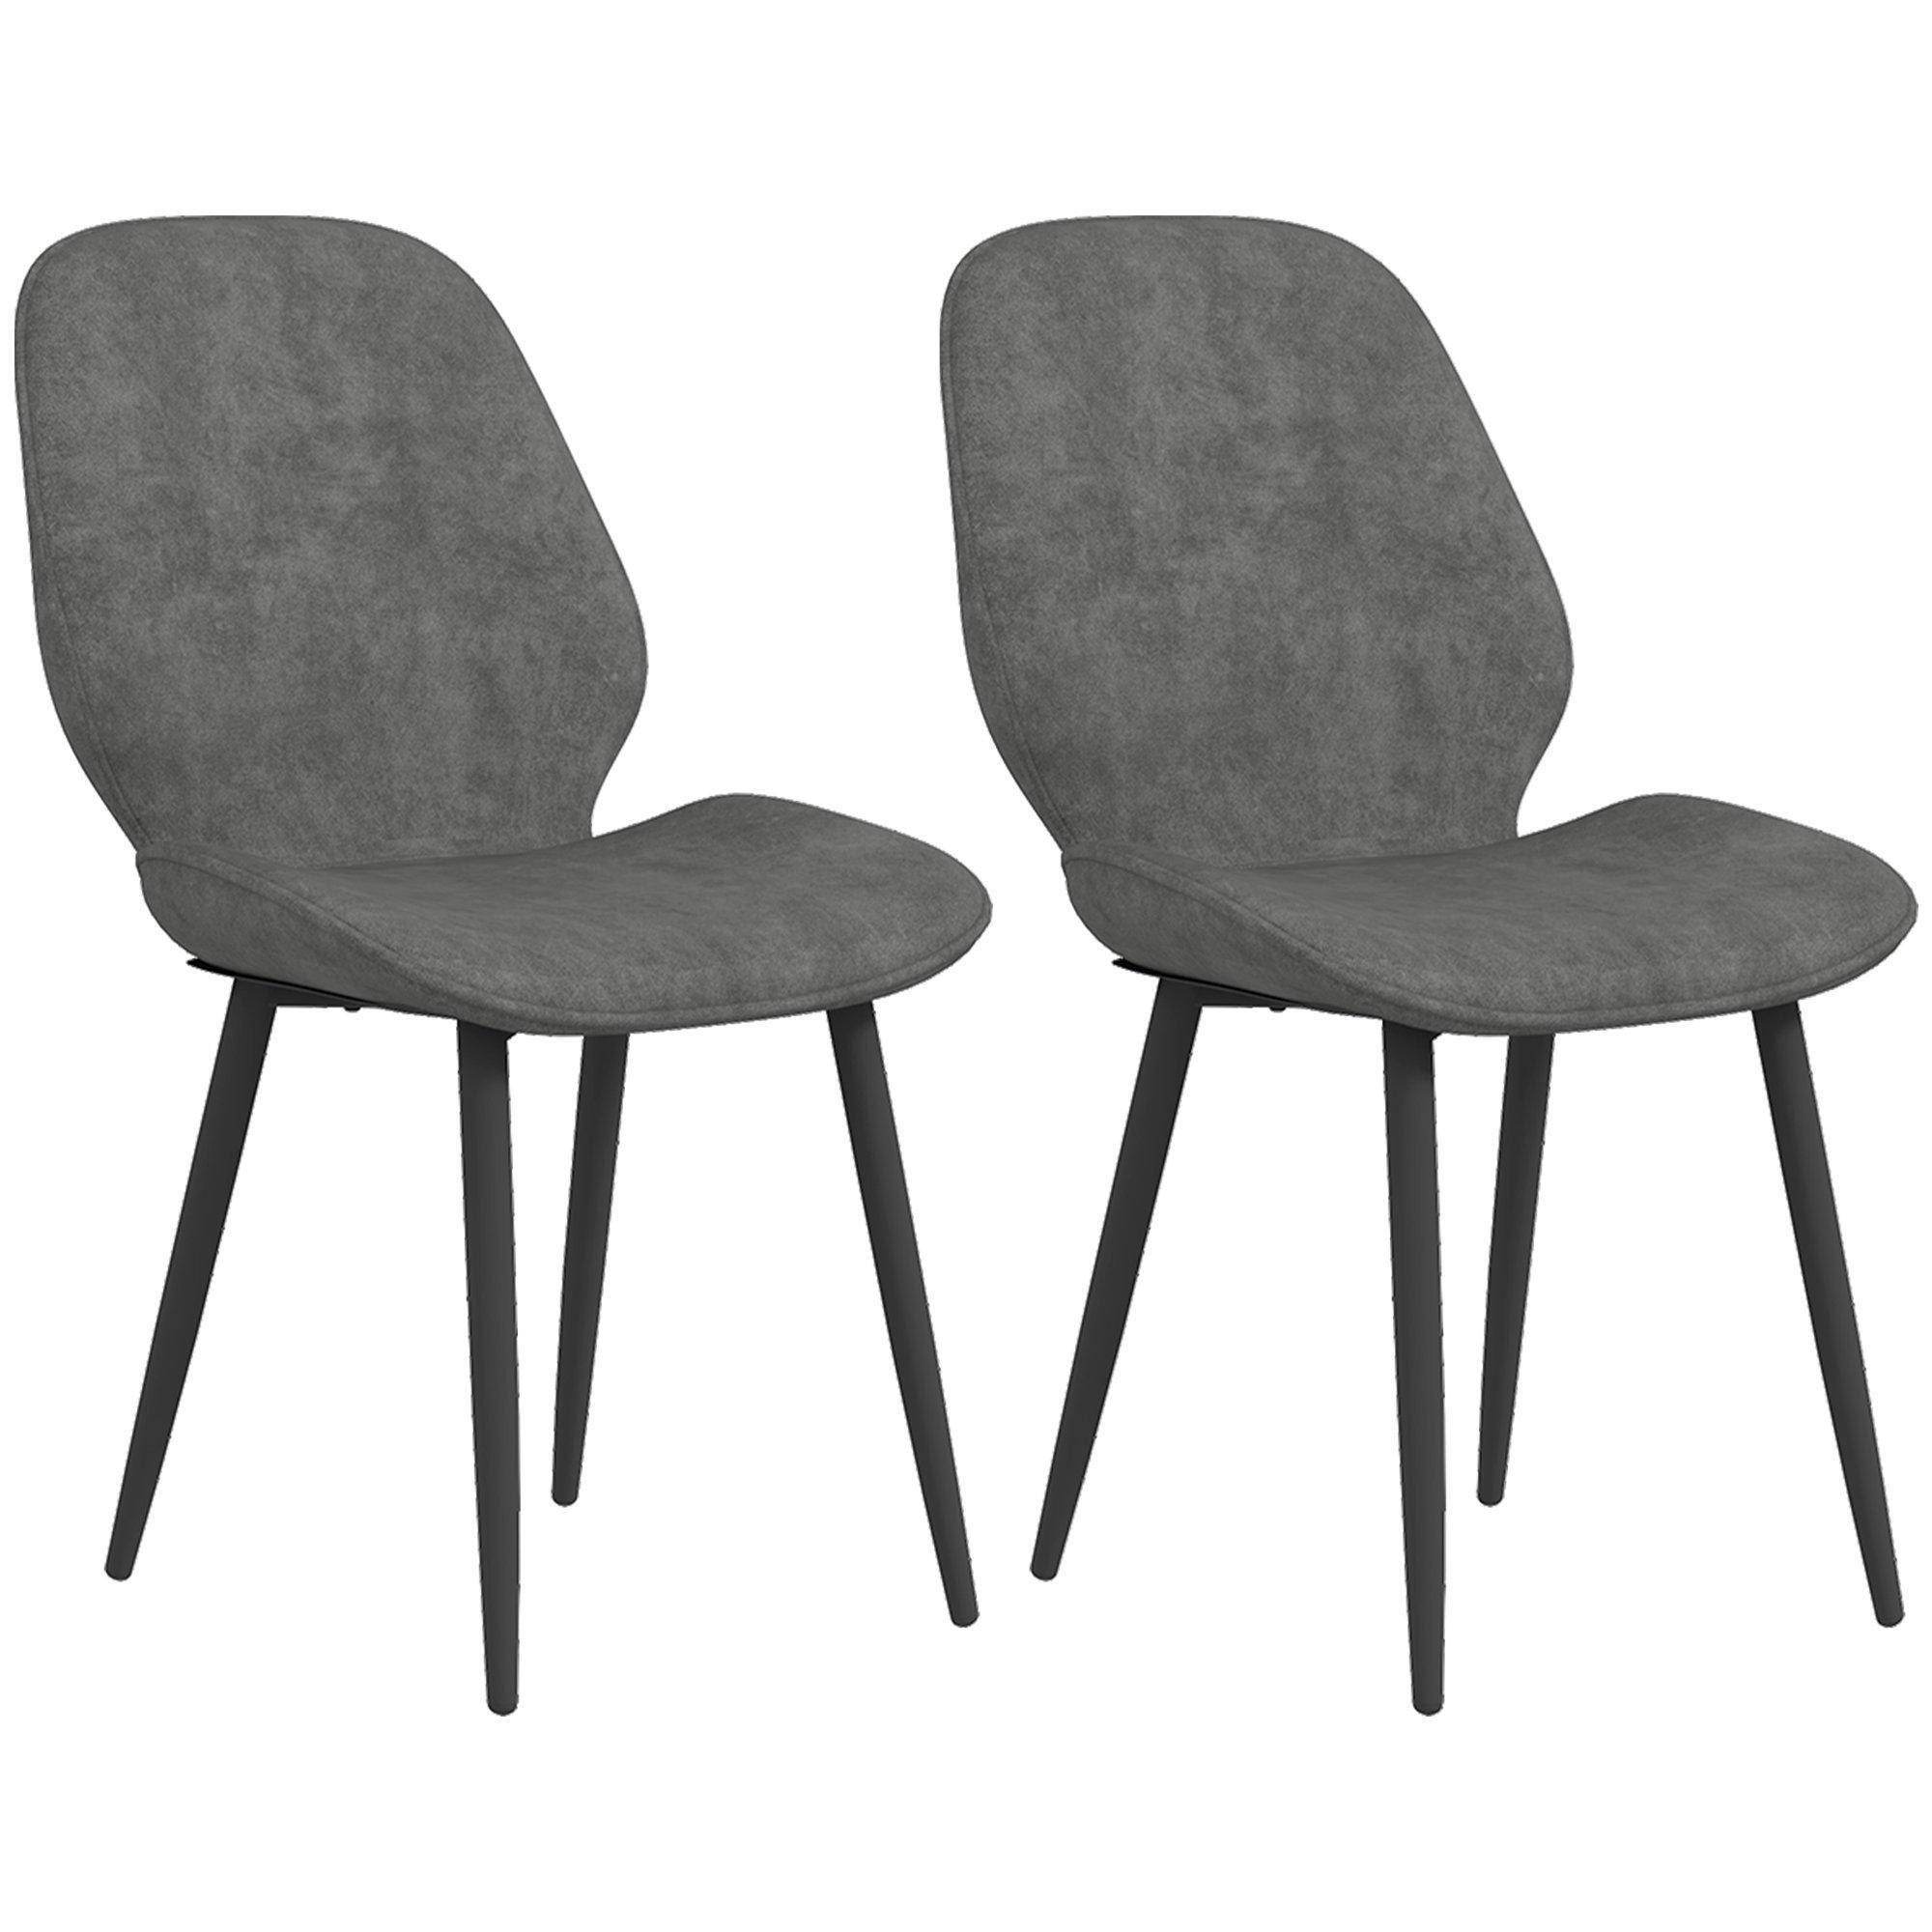 2 Piece Kitchen Chairs, Fabric Dining Chairs with Steel Legs - image 1